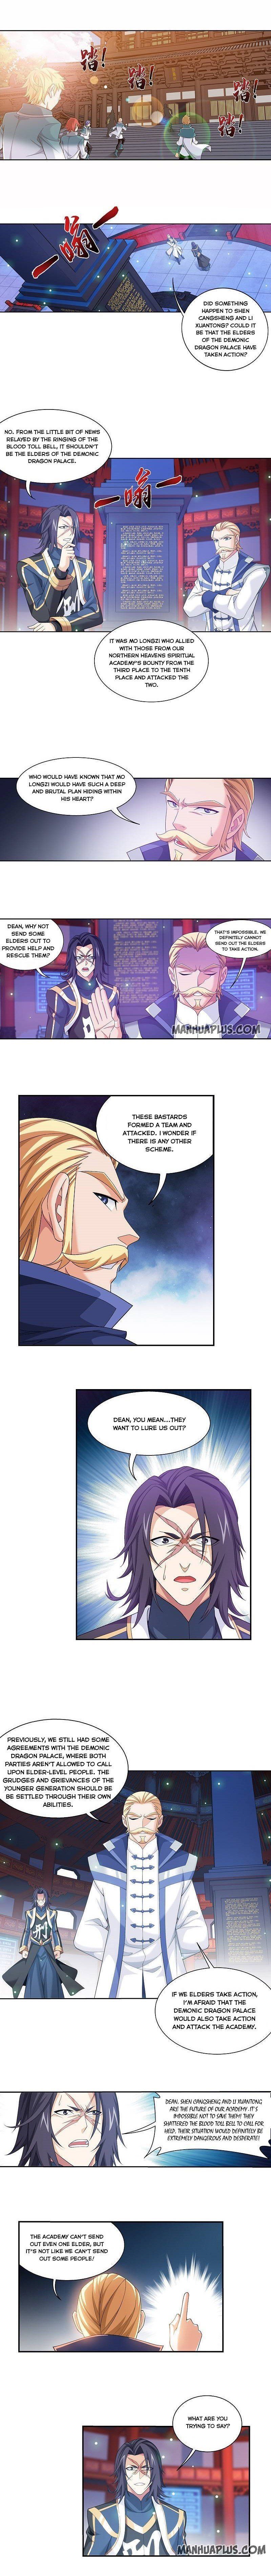 The Great Ruler Chapter 200 page 2